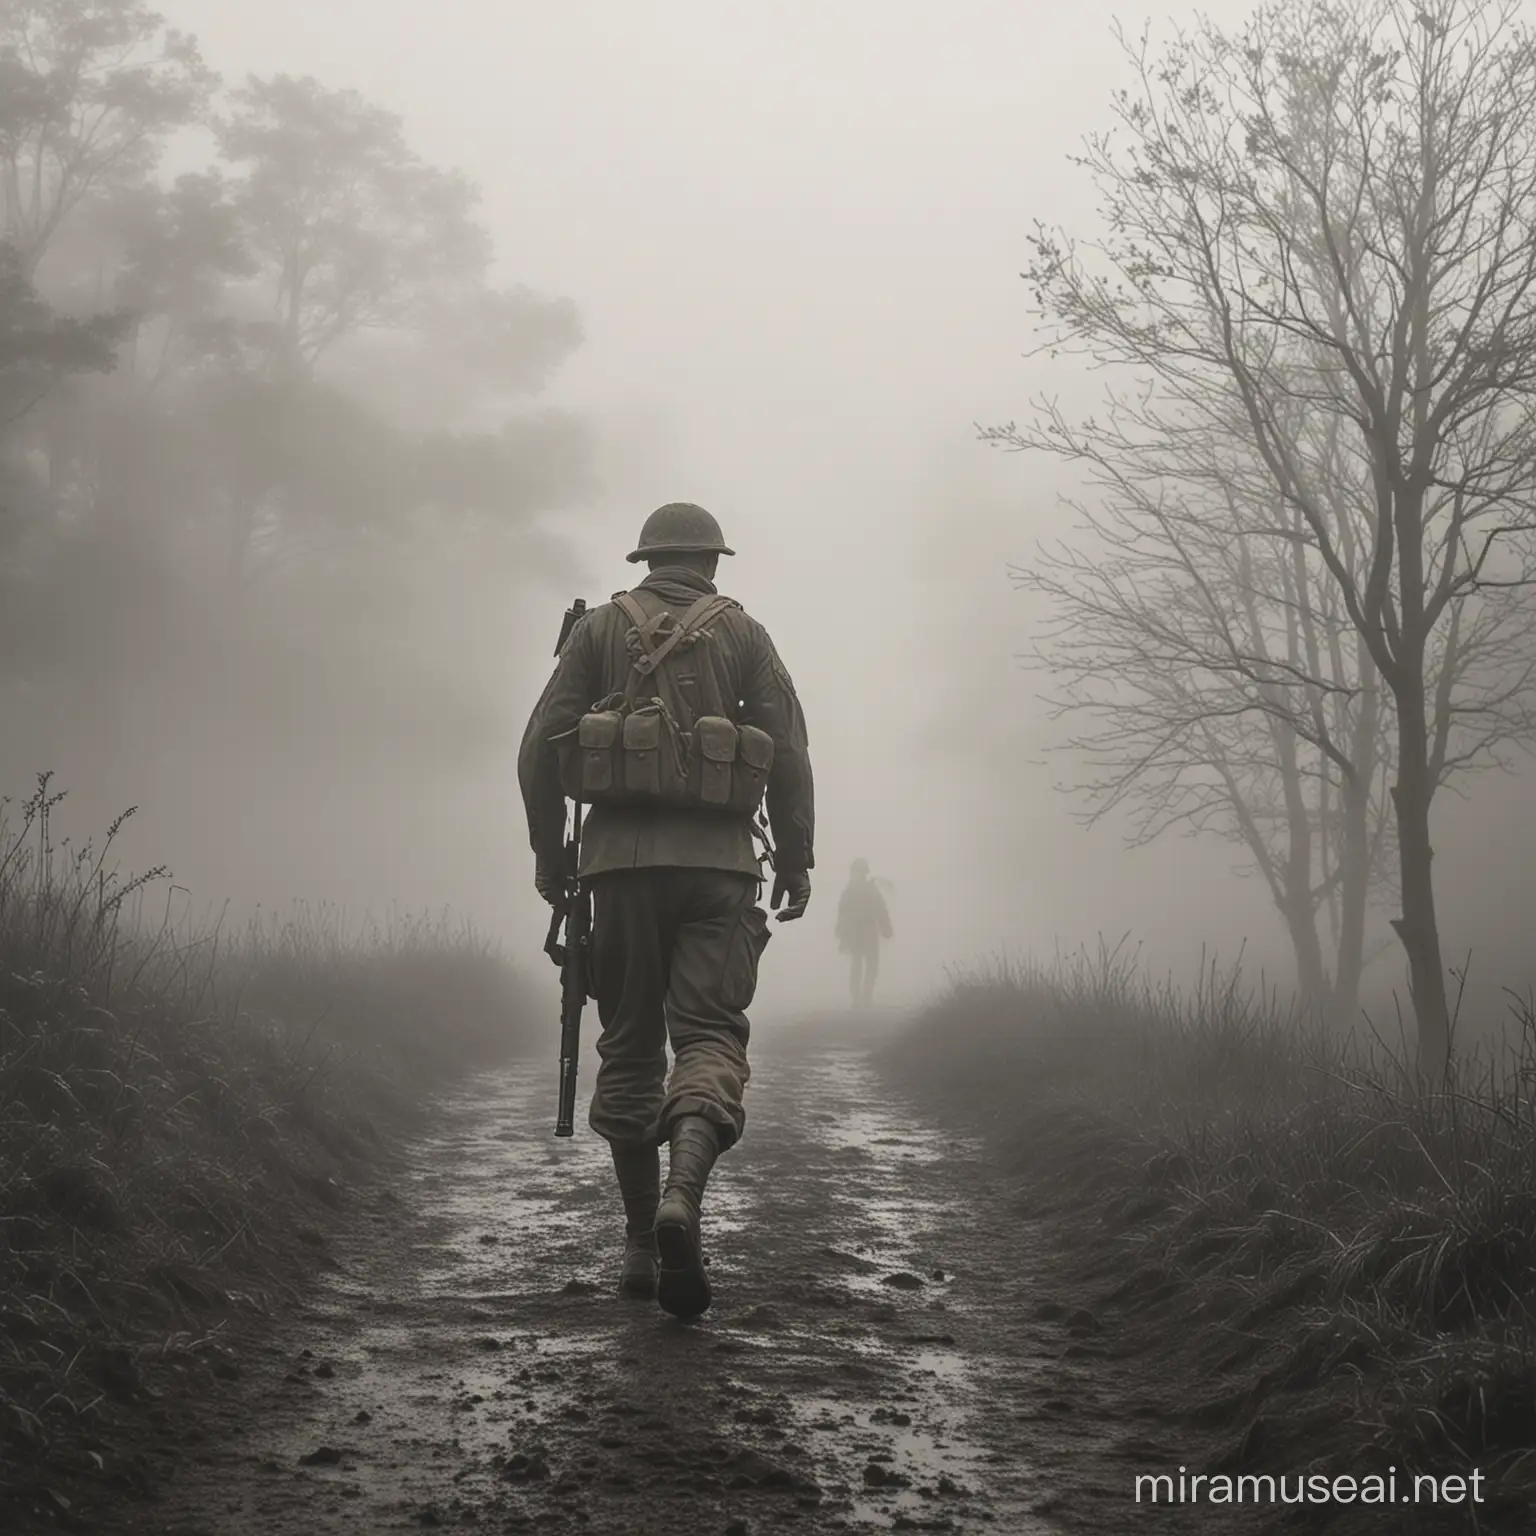 Solider walking into the mist